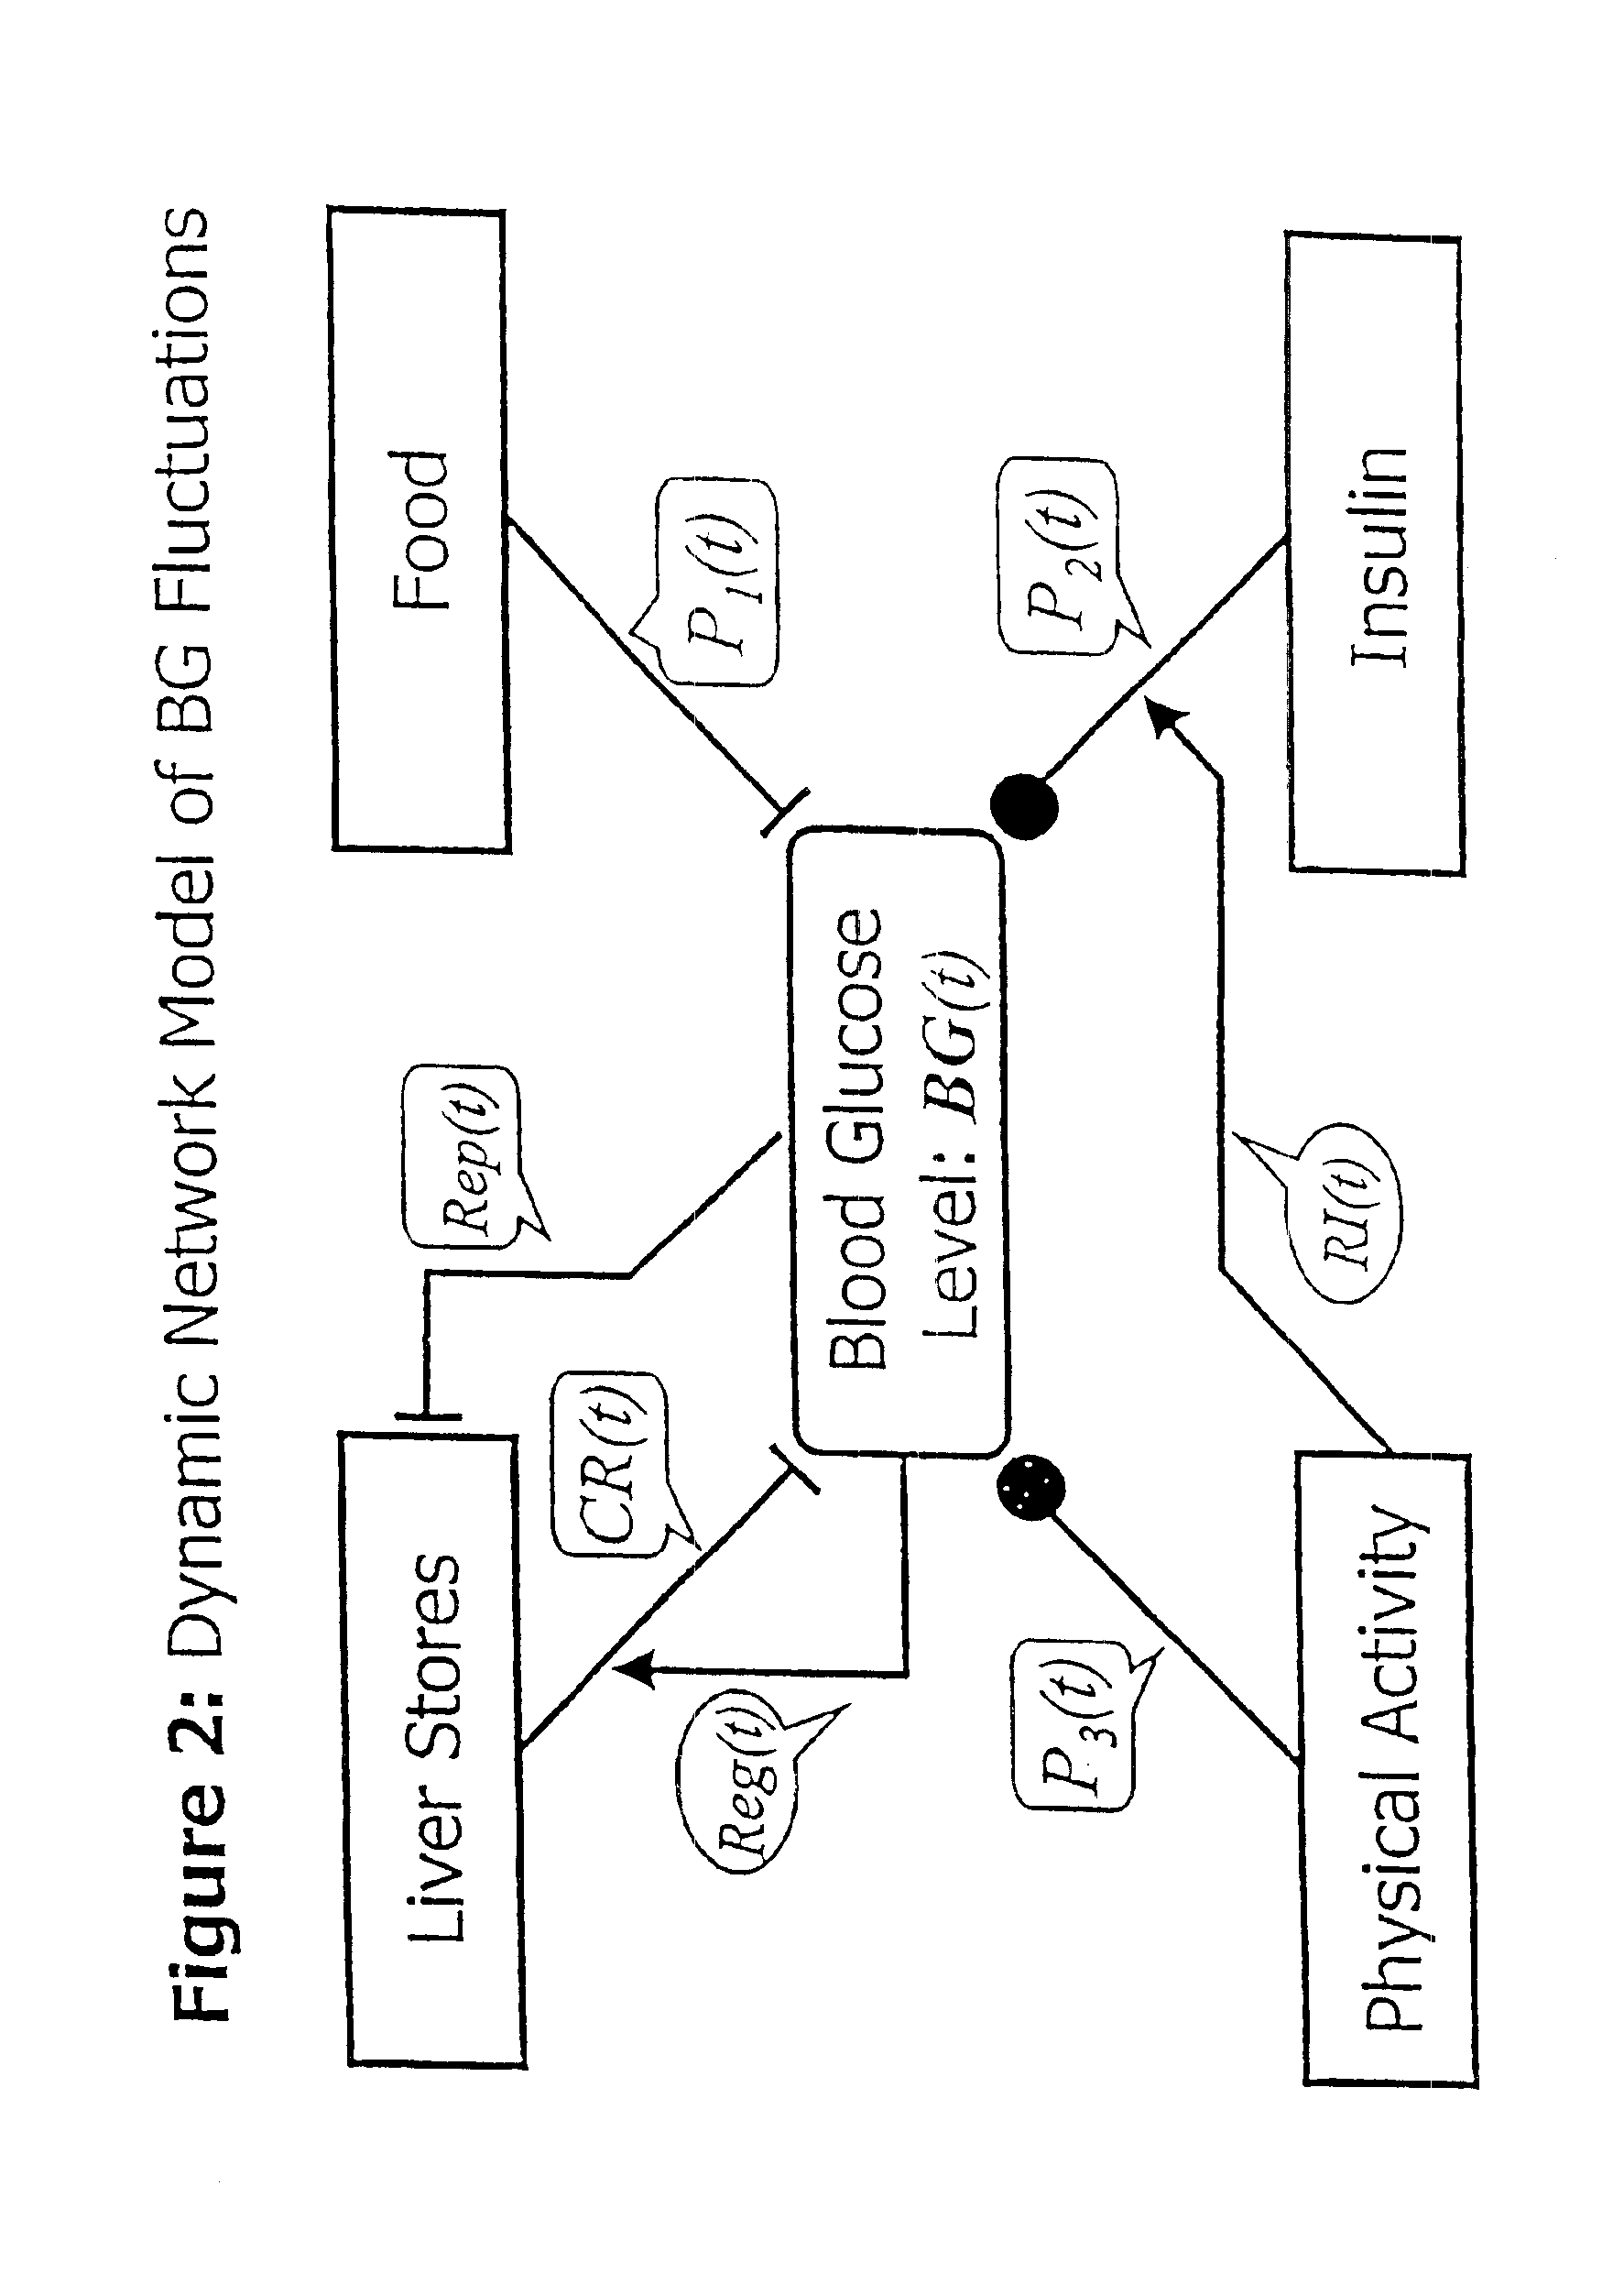 Method and apparatus for predicting the risk of hypoglycemia